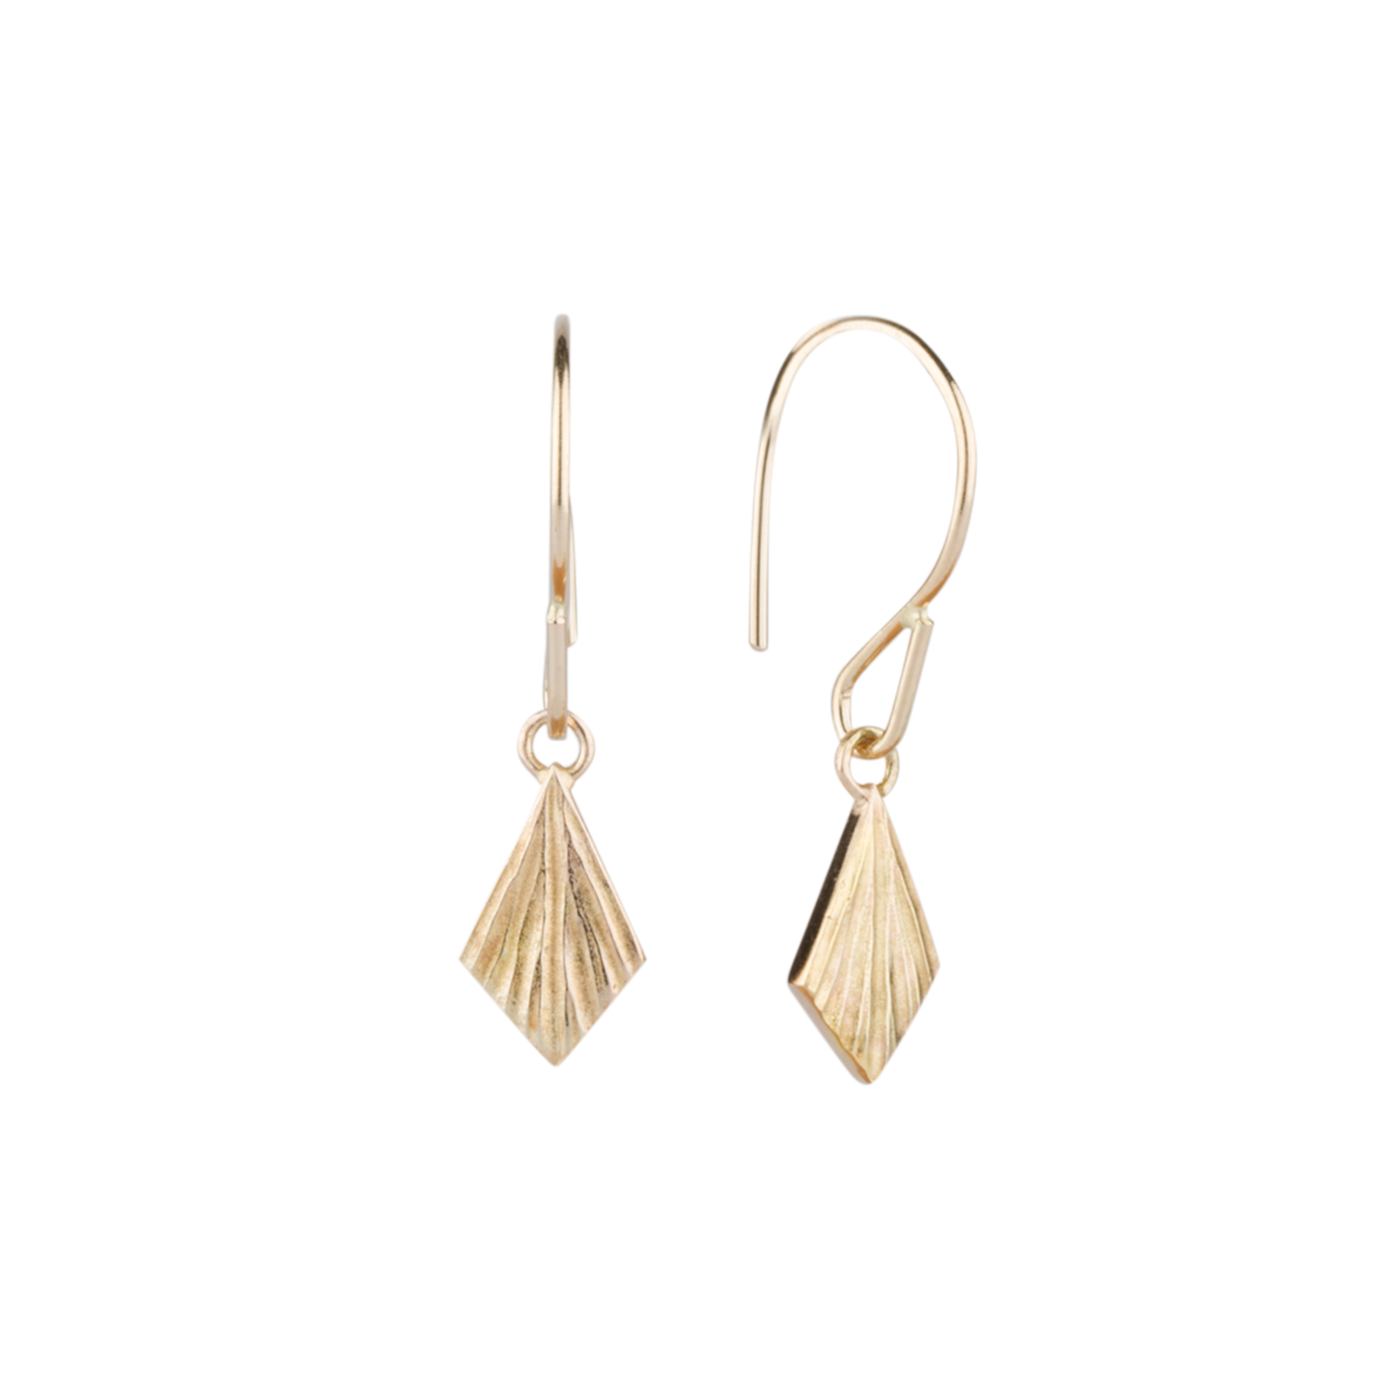 Gold Flame Earrings by Corey Egan side view on a white background